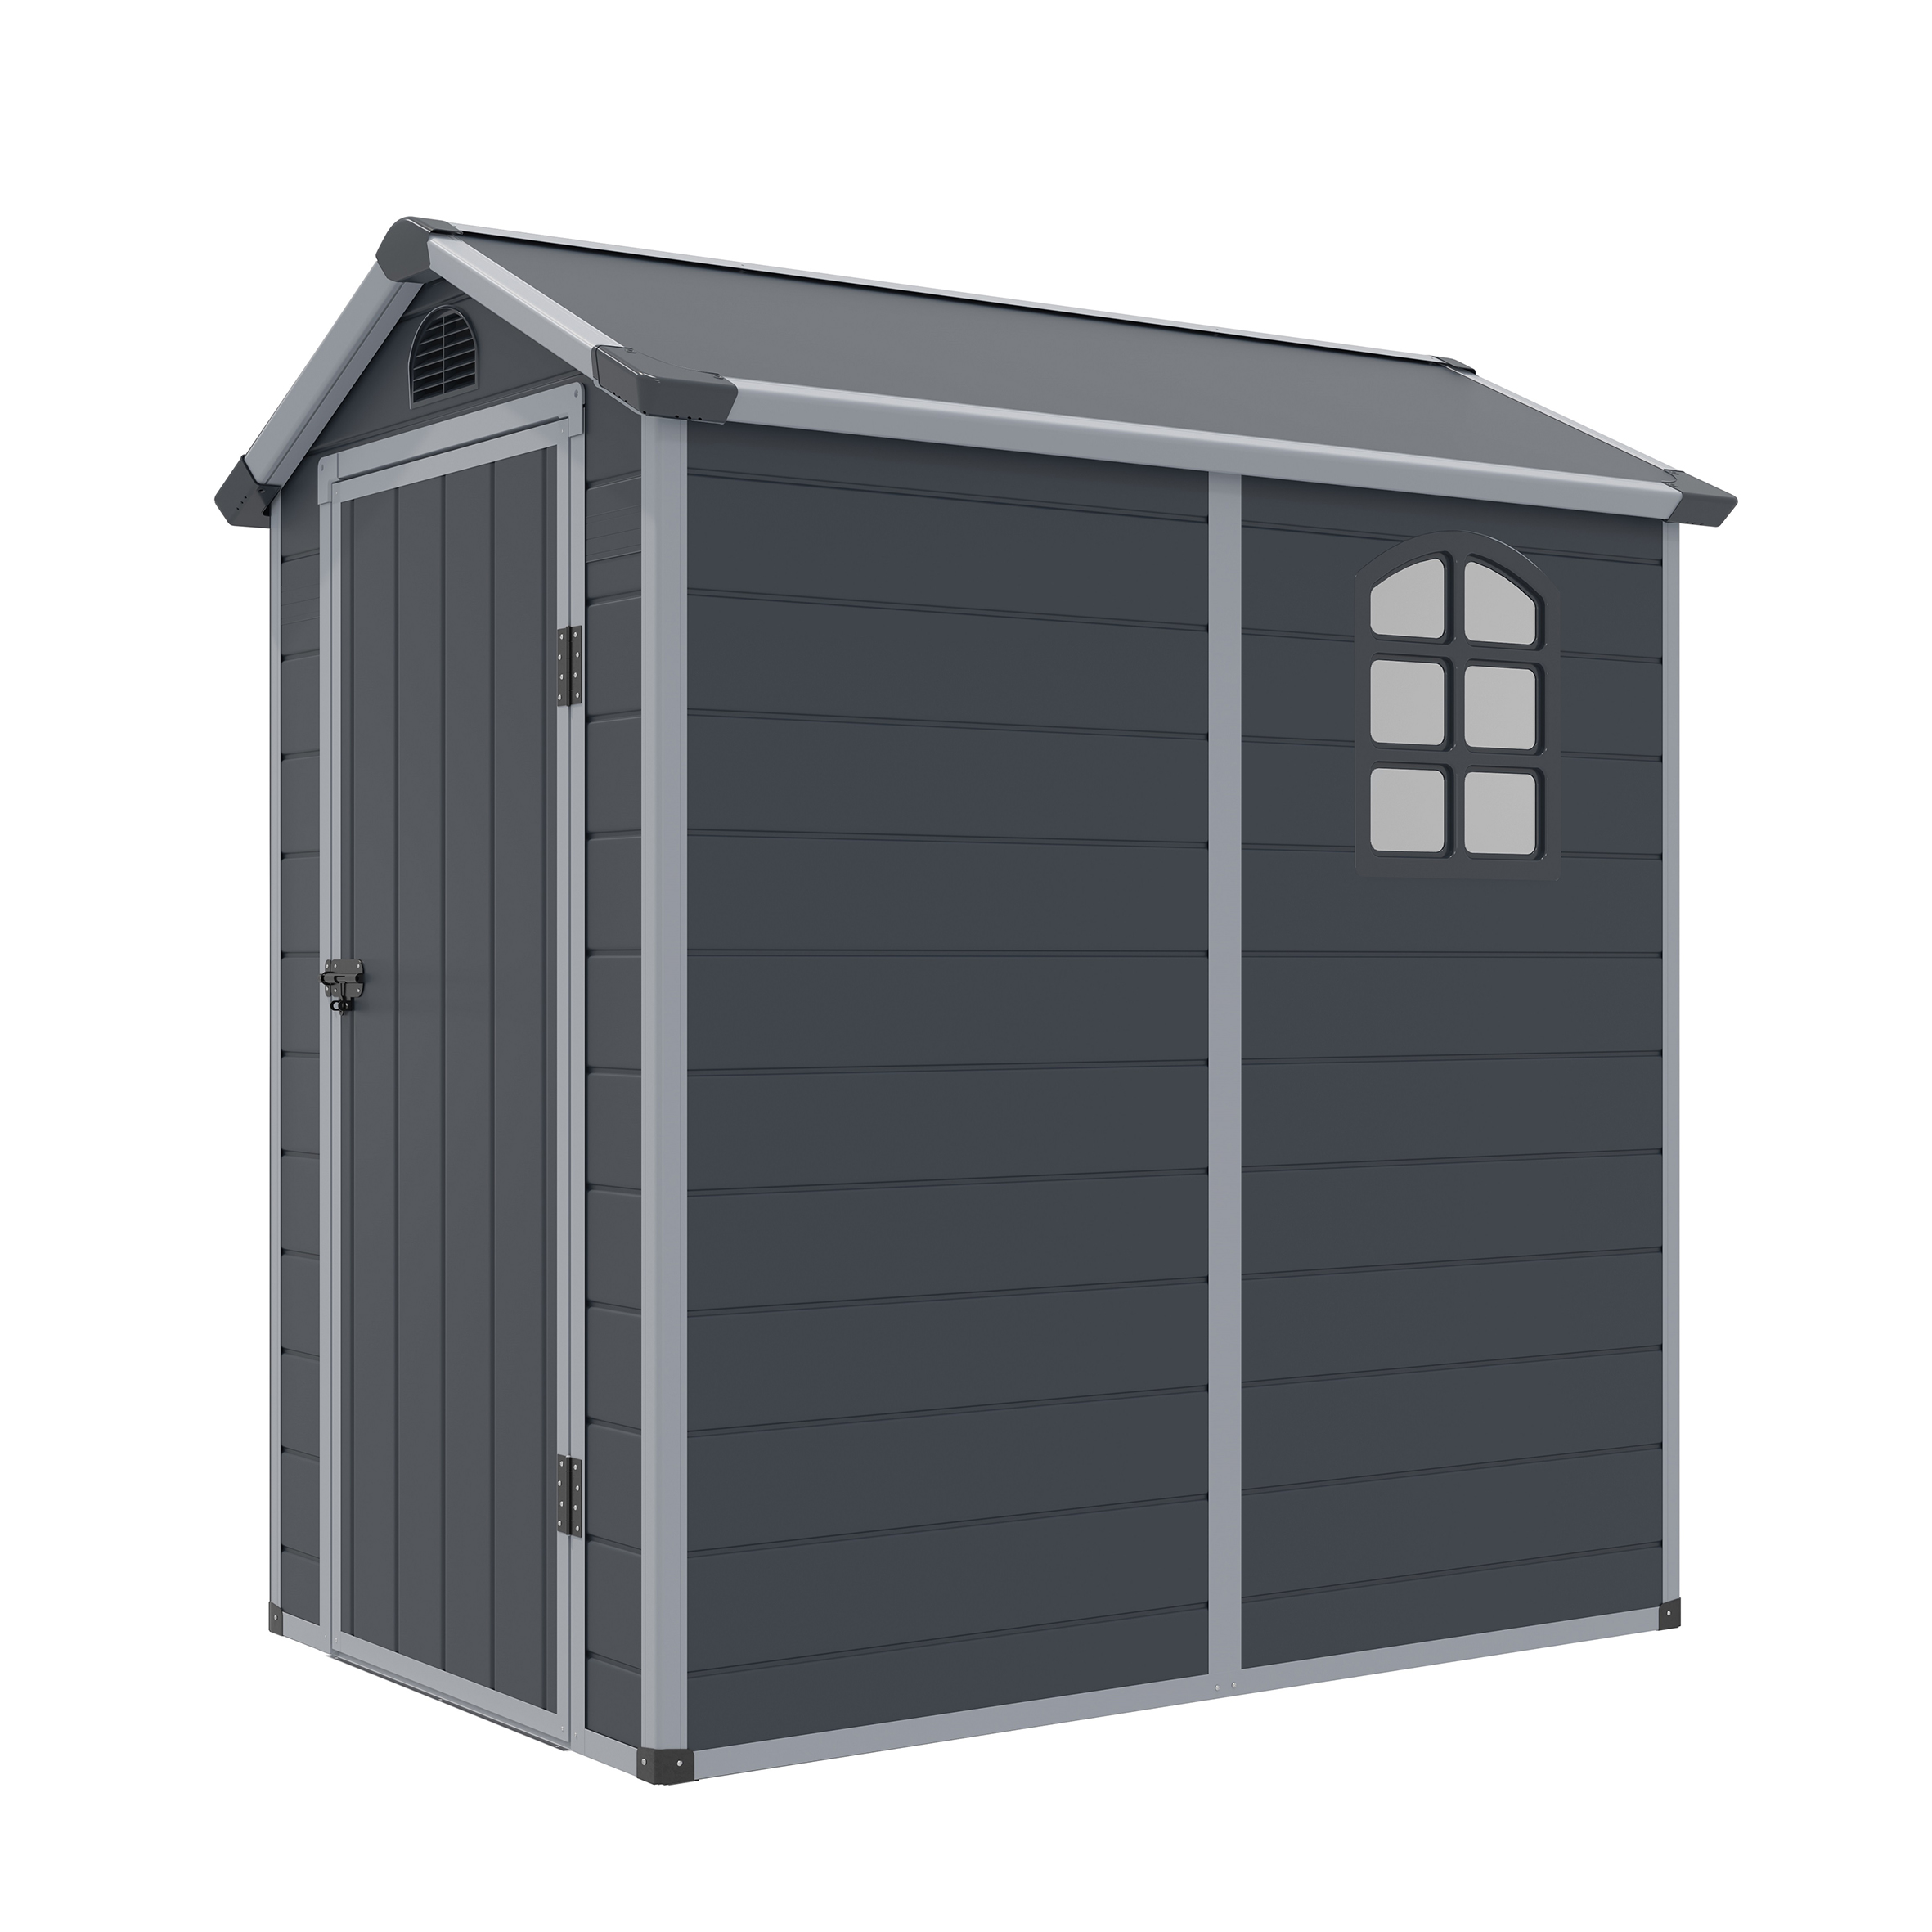 Featured image for “RGP | Airevale™ Apex Shed 4x6 (Dark Grey)”